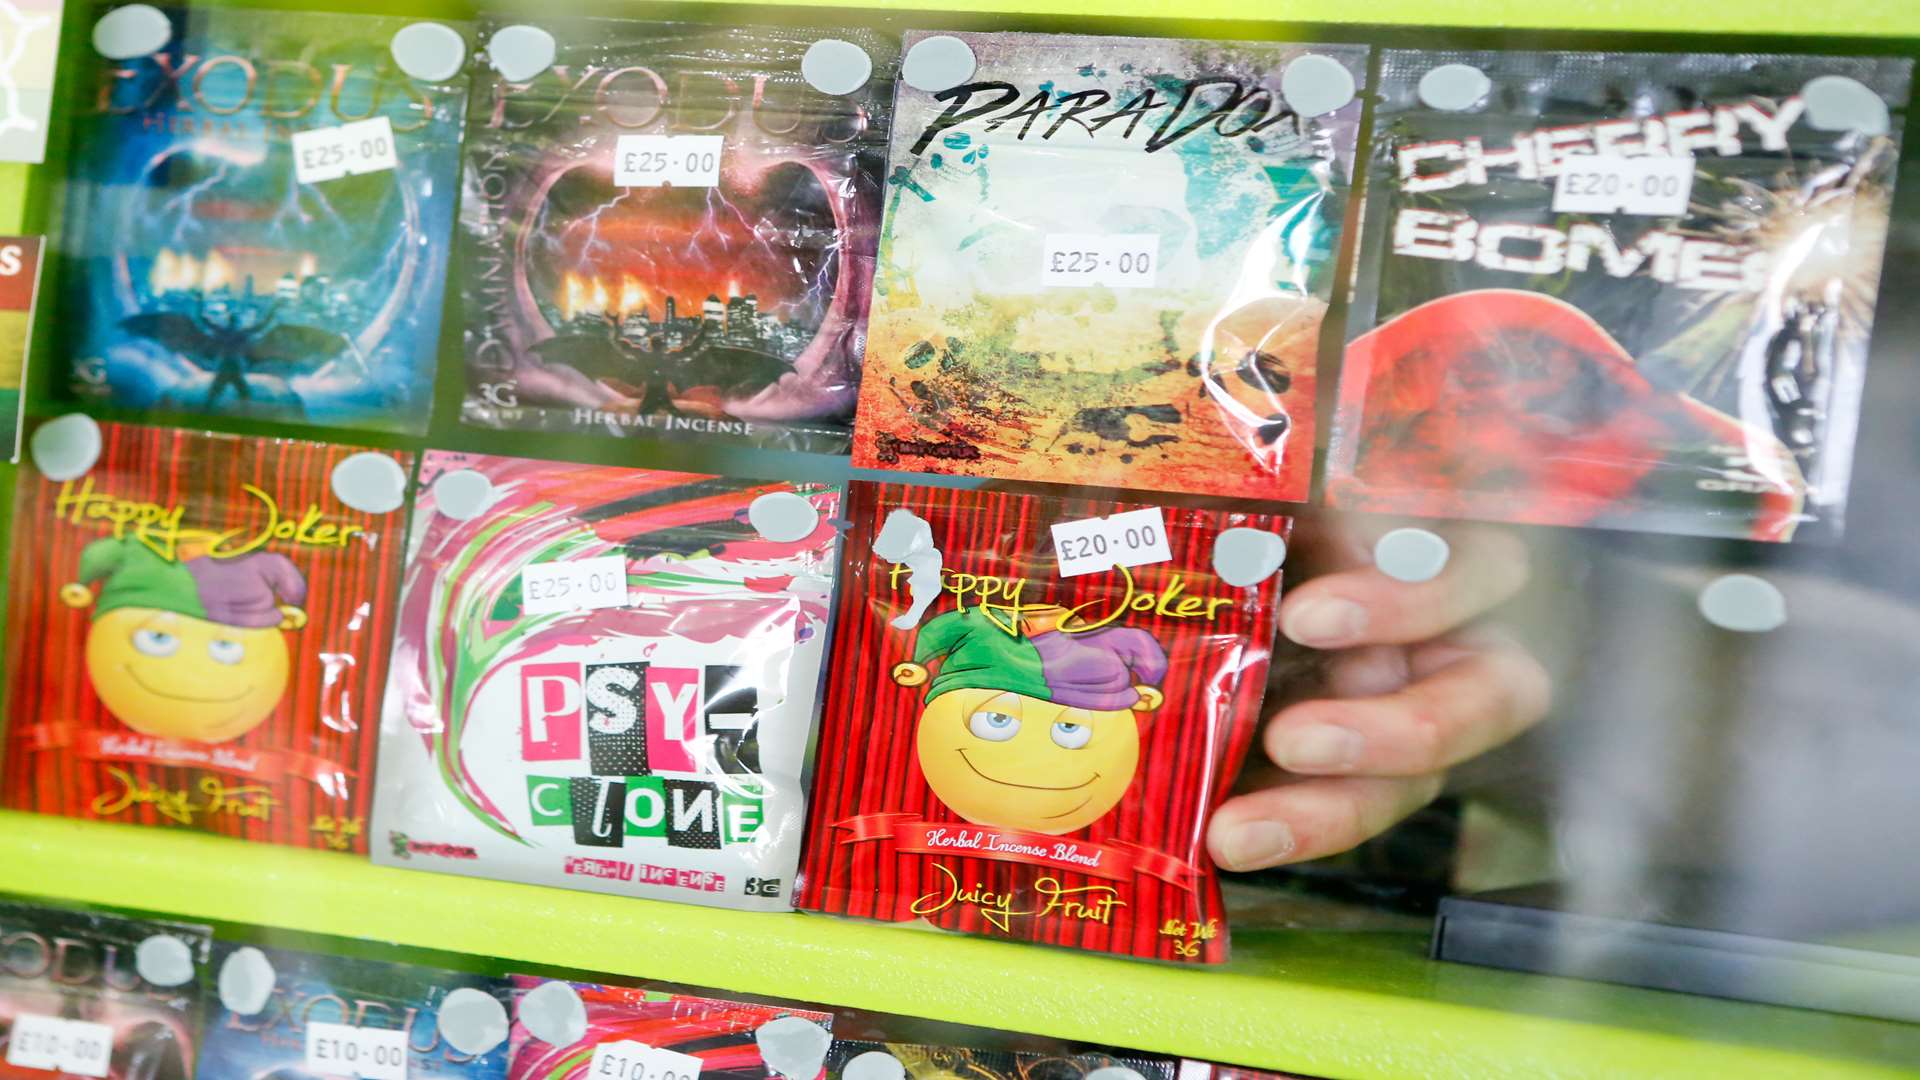 Legal highs were banned